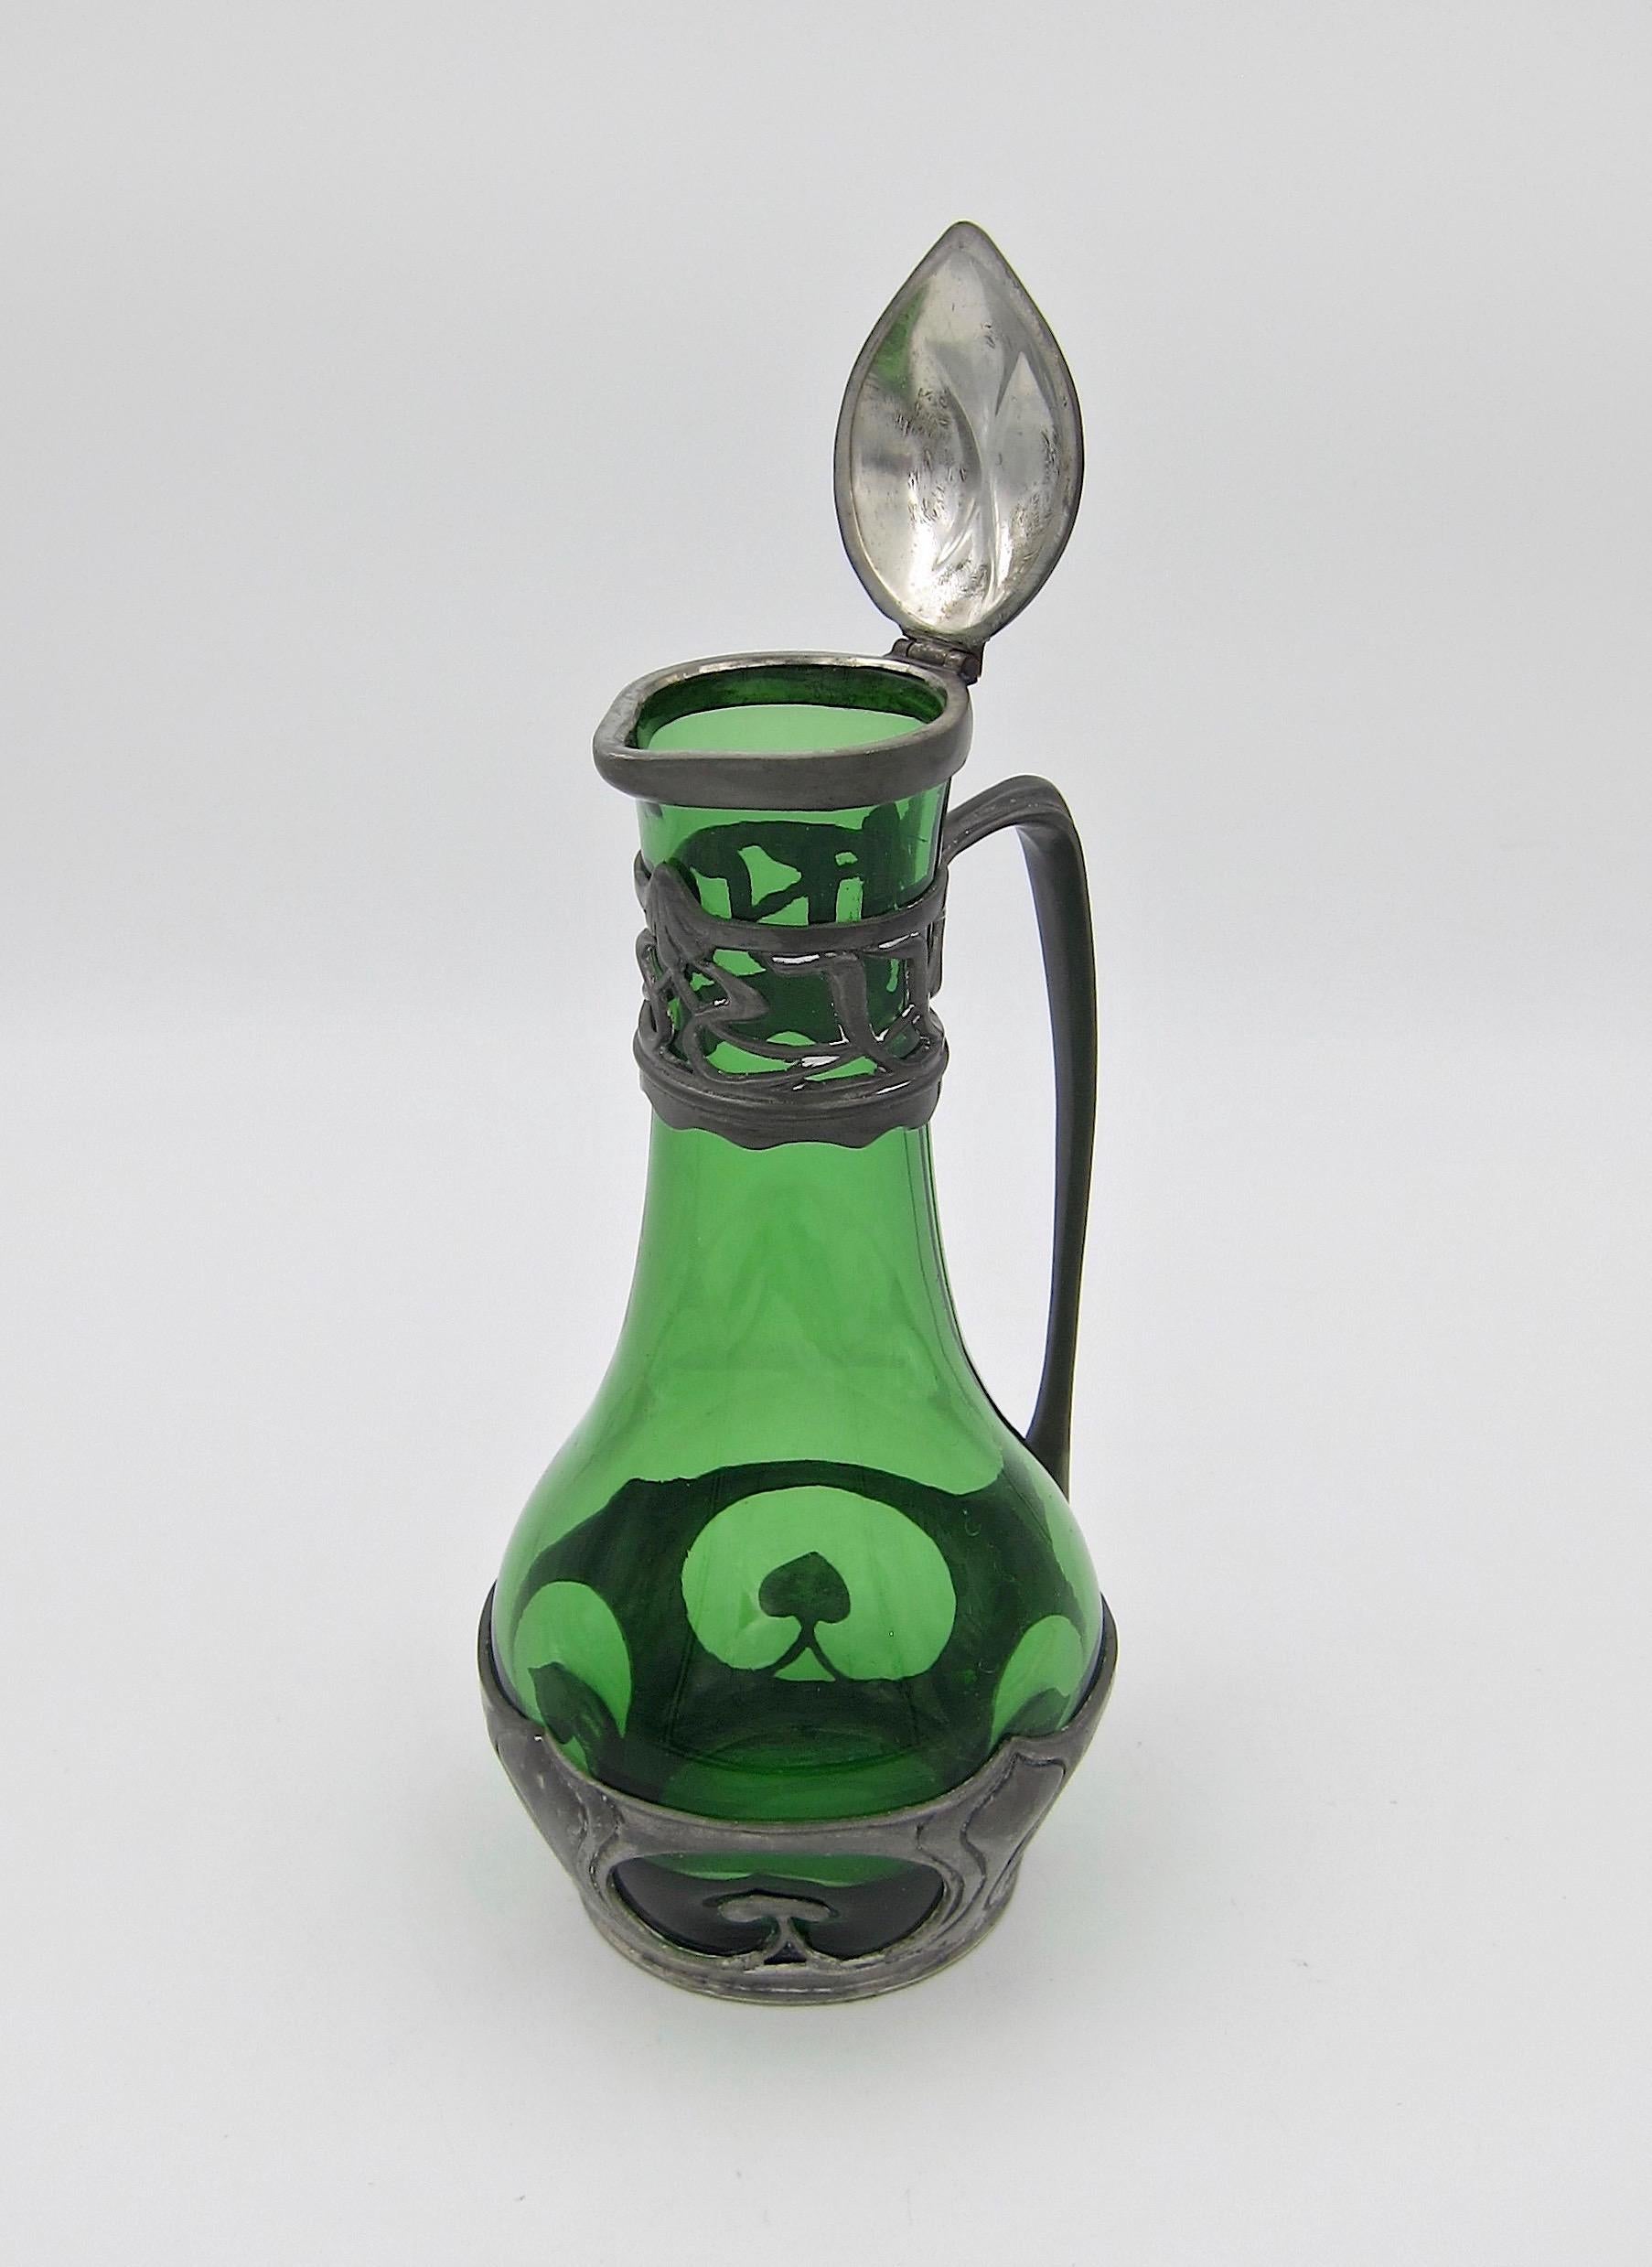 A stylish German green glass carafe with Jugendstil pewter metal mounts. The antique wine carafe was made by Walter Scherf & Company of Nuremberg circa 1900. The ewer / pitcher has a hinged lid with a bud finial and a looped handle joining two